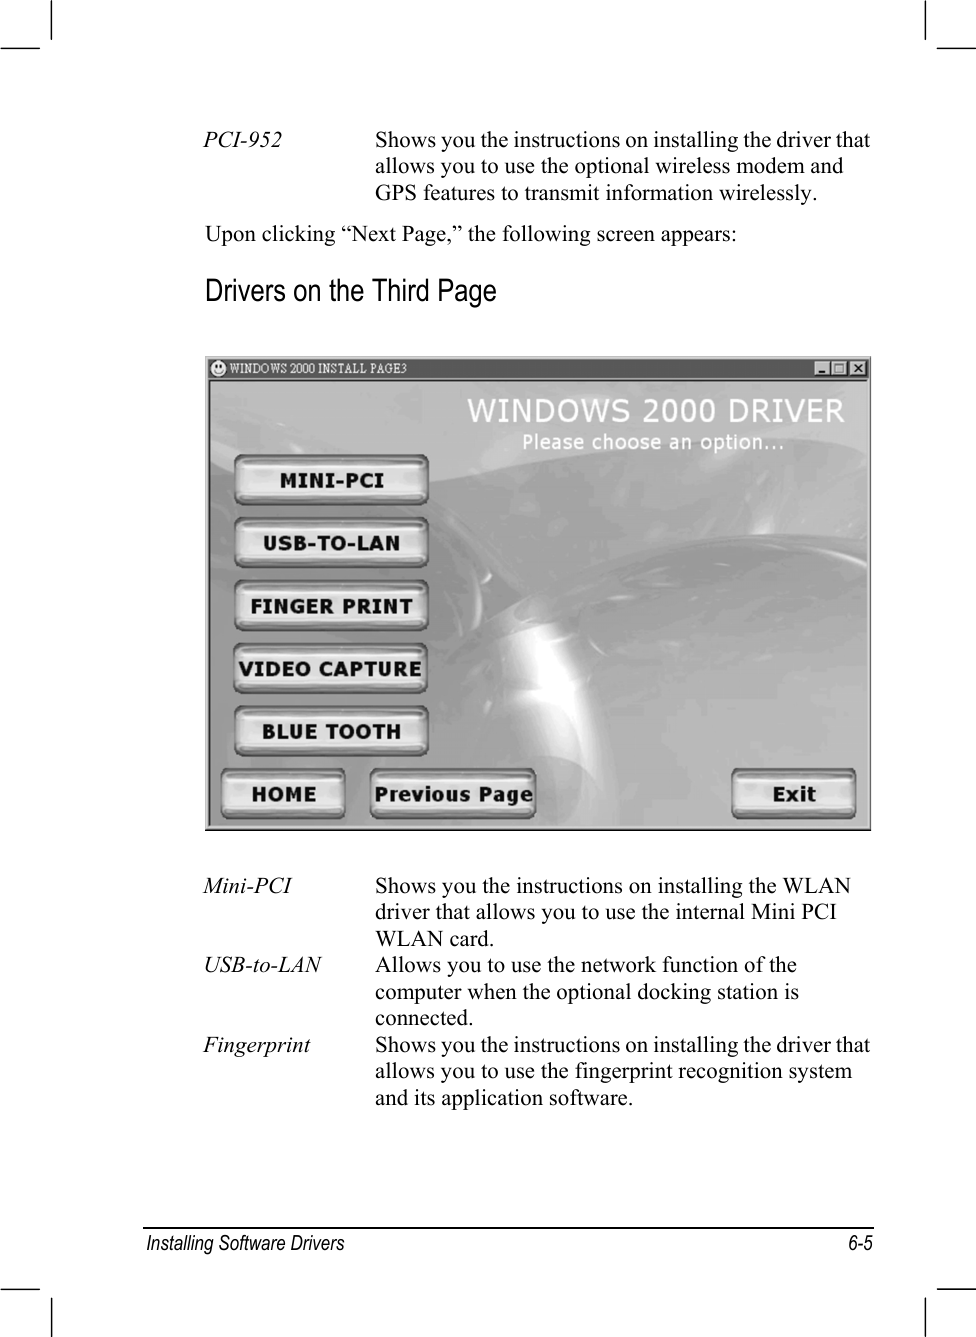 Installing Software Drivers 6-5PCI-952 Shows you the instructions on installing the driver thatallows you to use the optional wireless modem andGPS features to transmit information wirelessly.Upon clicking “Next Page,” the following screen appears:Drivers on the Third PageMini-PCI Shows you the instructions on installing the WLANdriver that allows you to use the internal Mini PCIWLAN card.USB-to-LAN Allows you to use the network function of thecomputer when the optional docking station isconnected.Fingerprint Shows you the instructions on installing the driver thatallows you to use the fingerprint recognition systemand its application software.